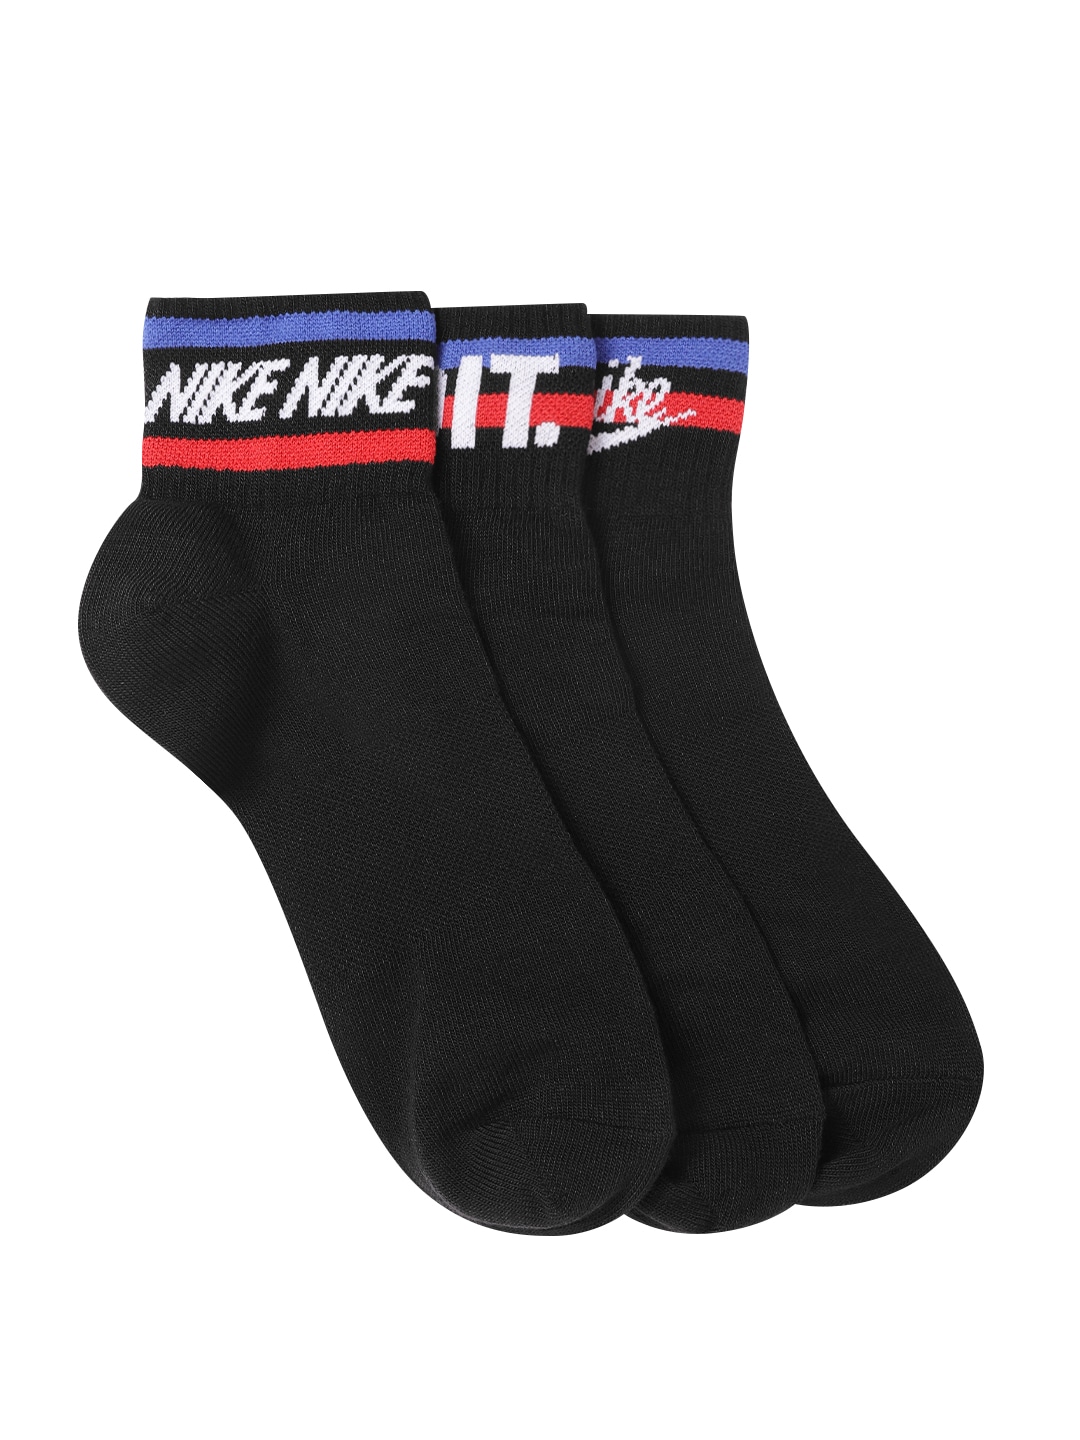 Nike Unisex Pack of 3 Black Striped Detail Above Ankle Length Socks Price in India